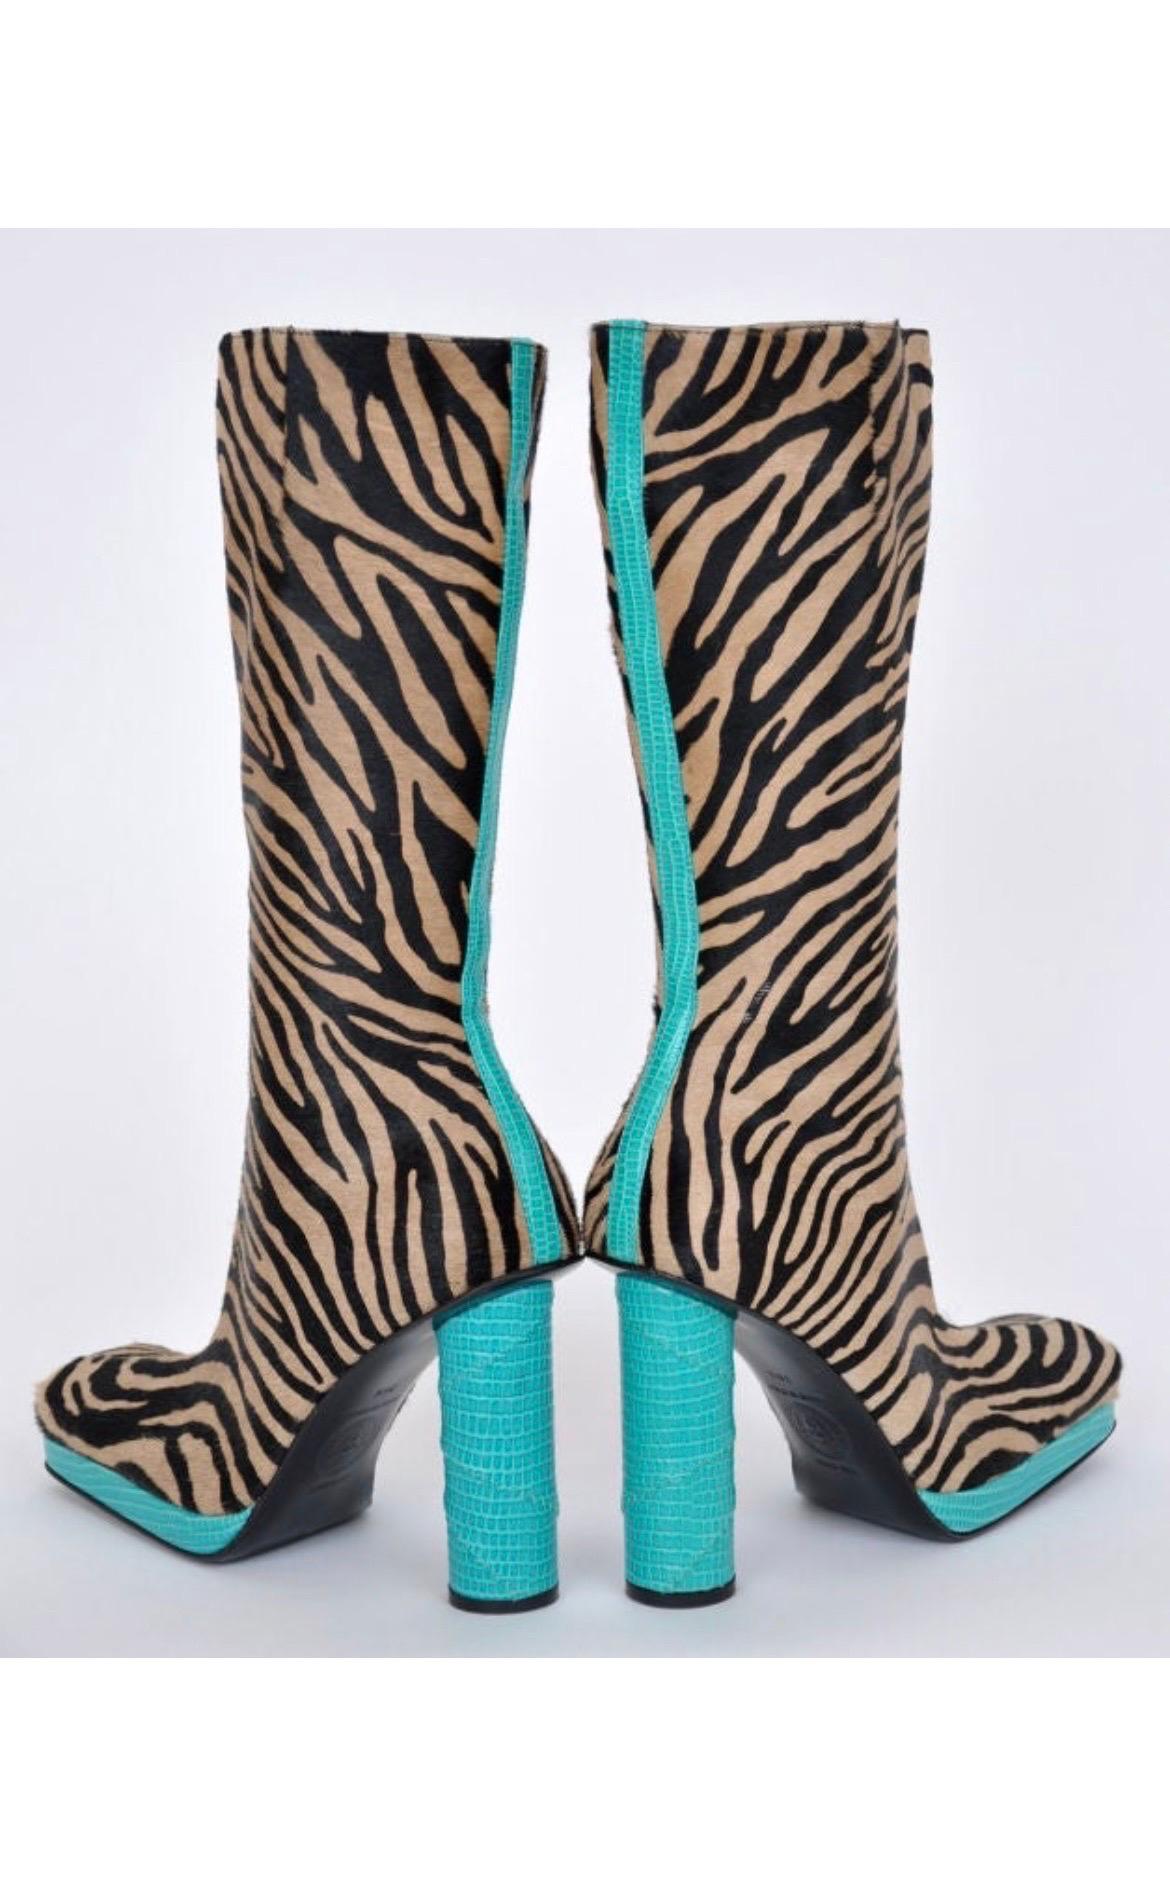 1999 Vintage Gianni Versace Runway Animal Print Fur and Lizard Boots 36.5 NWT For Sale 3